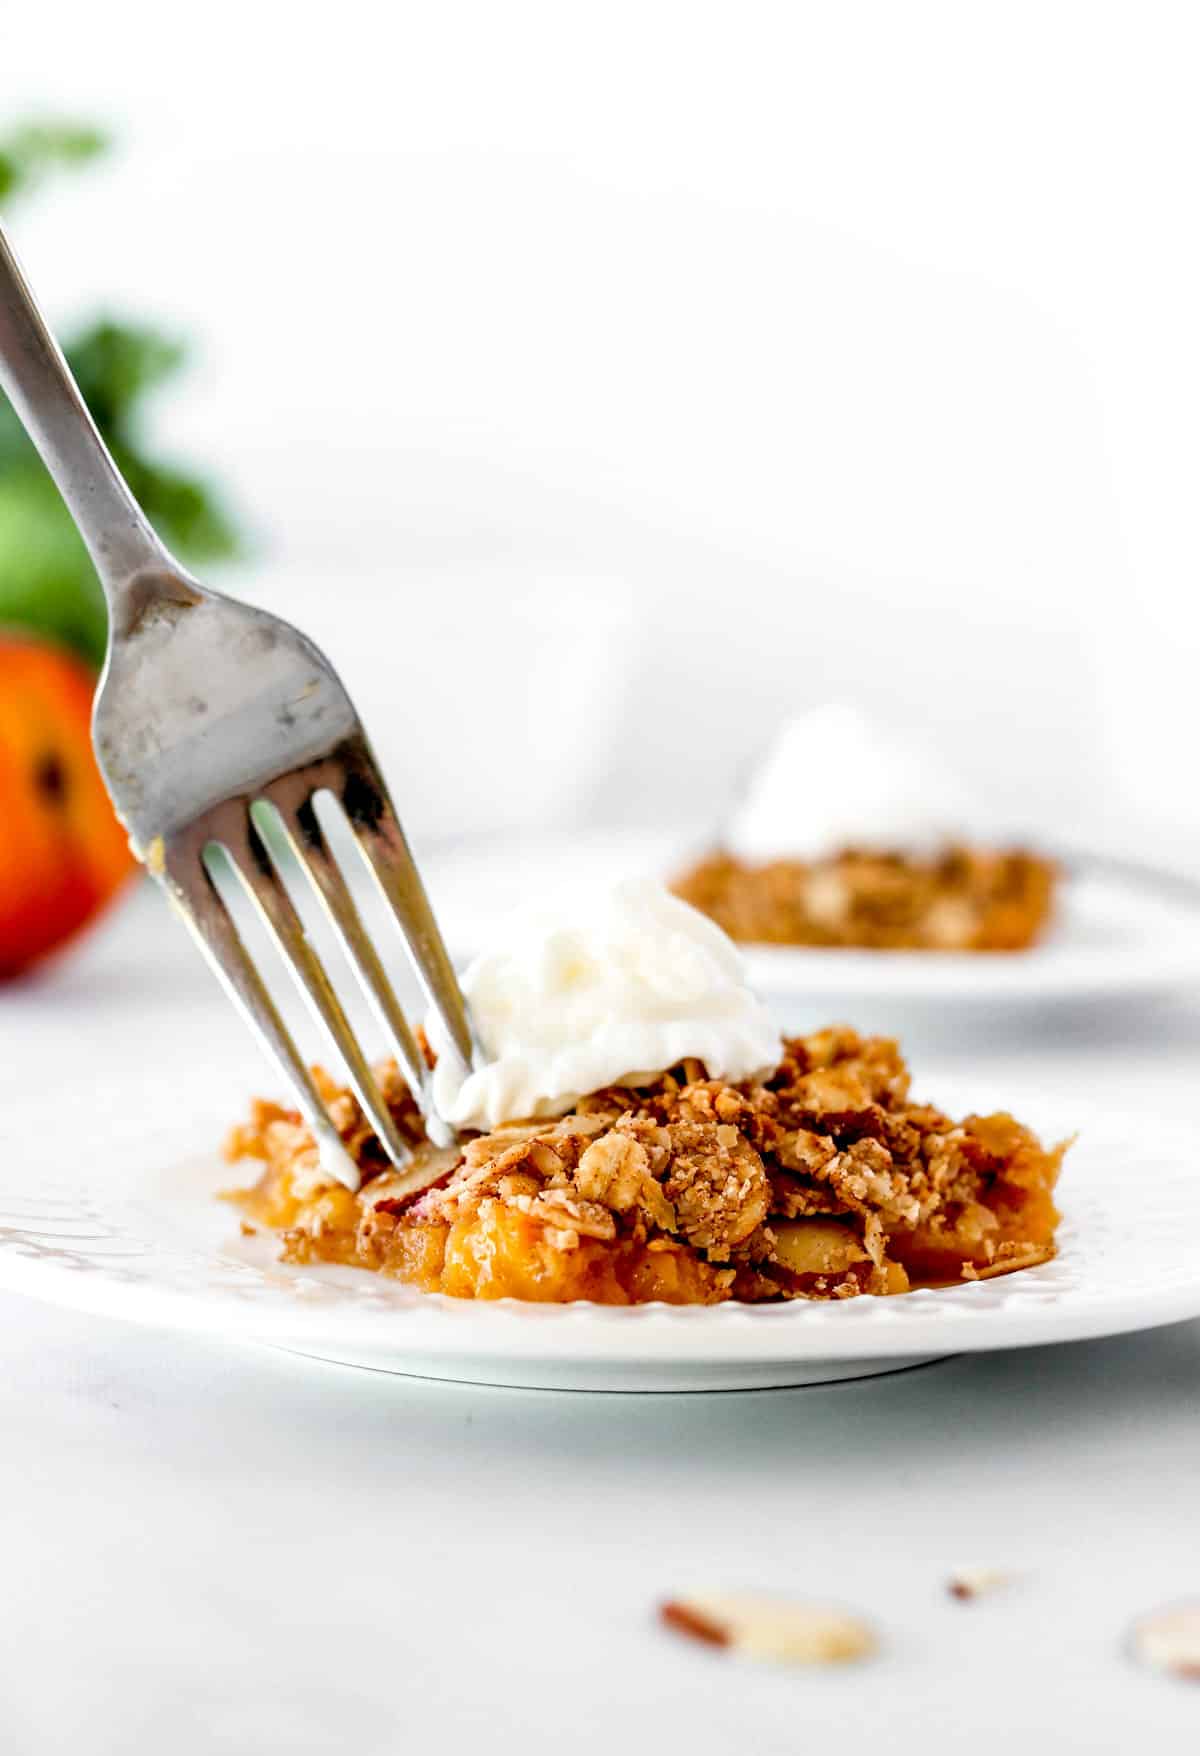 A fork digging into the healthy peach crisp on a plate.